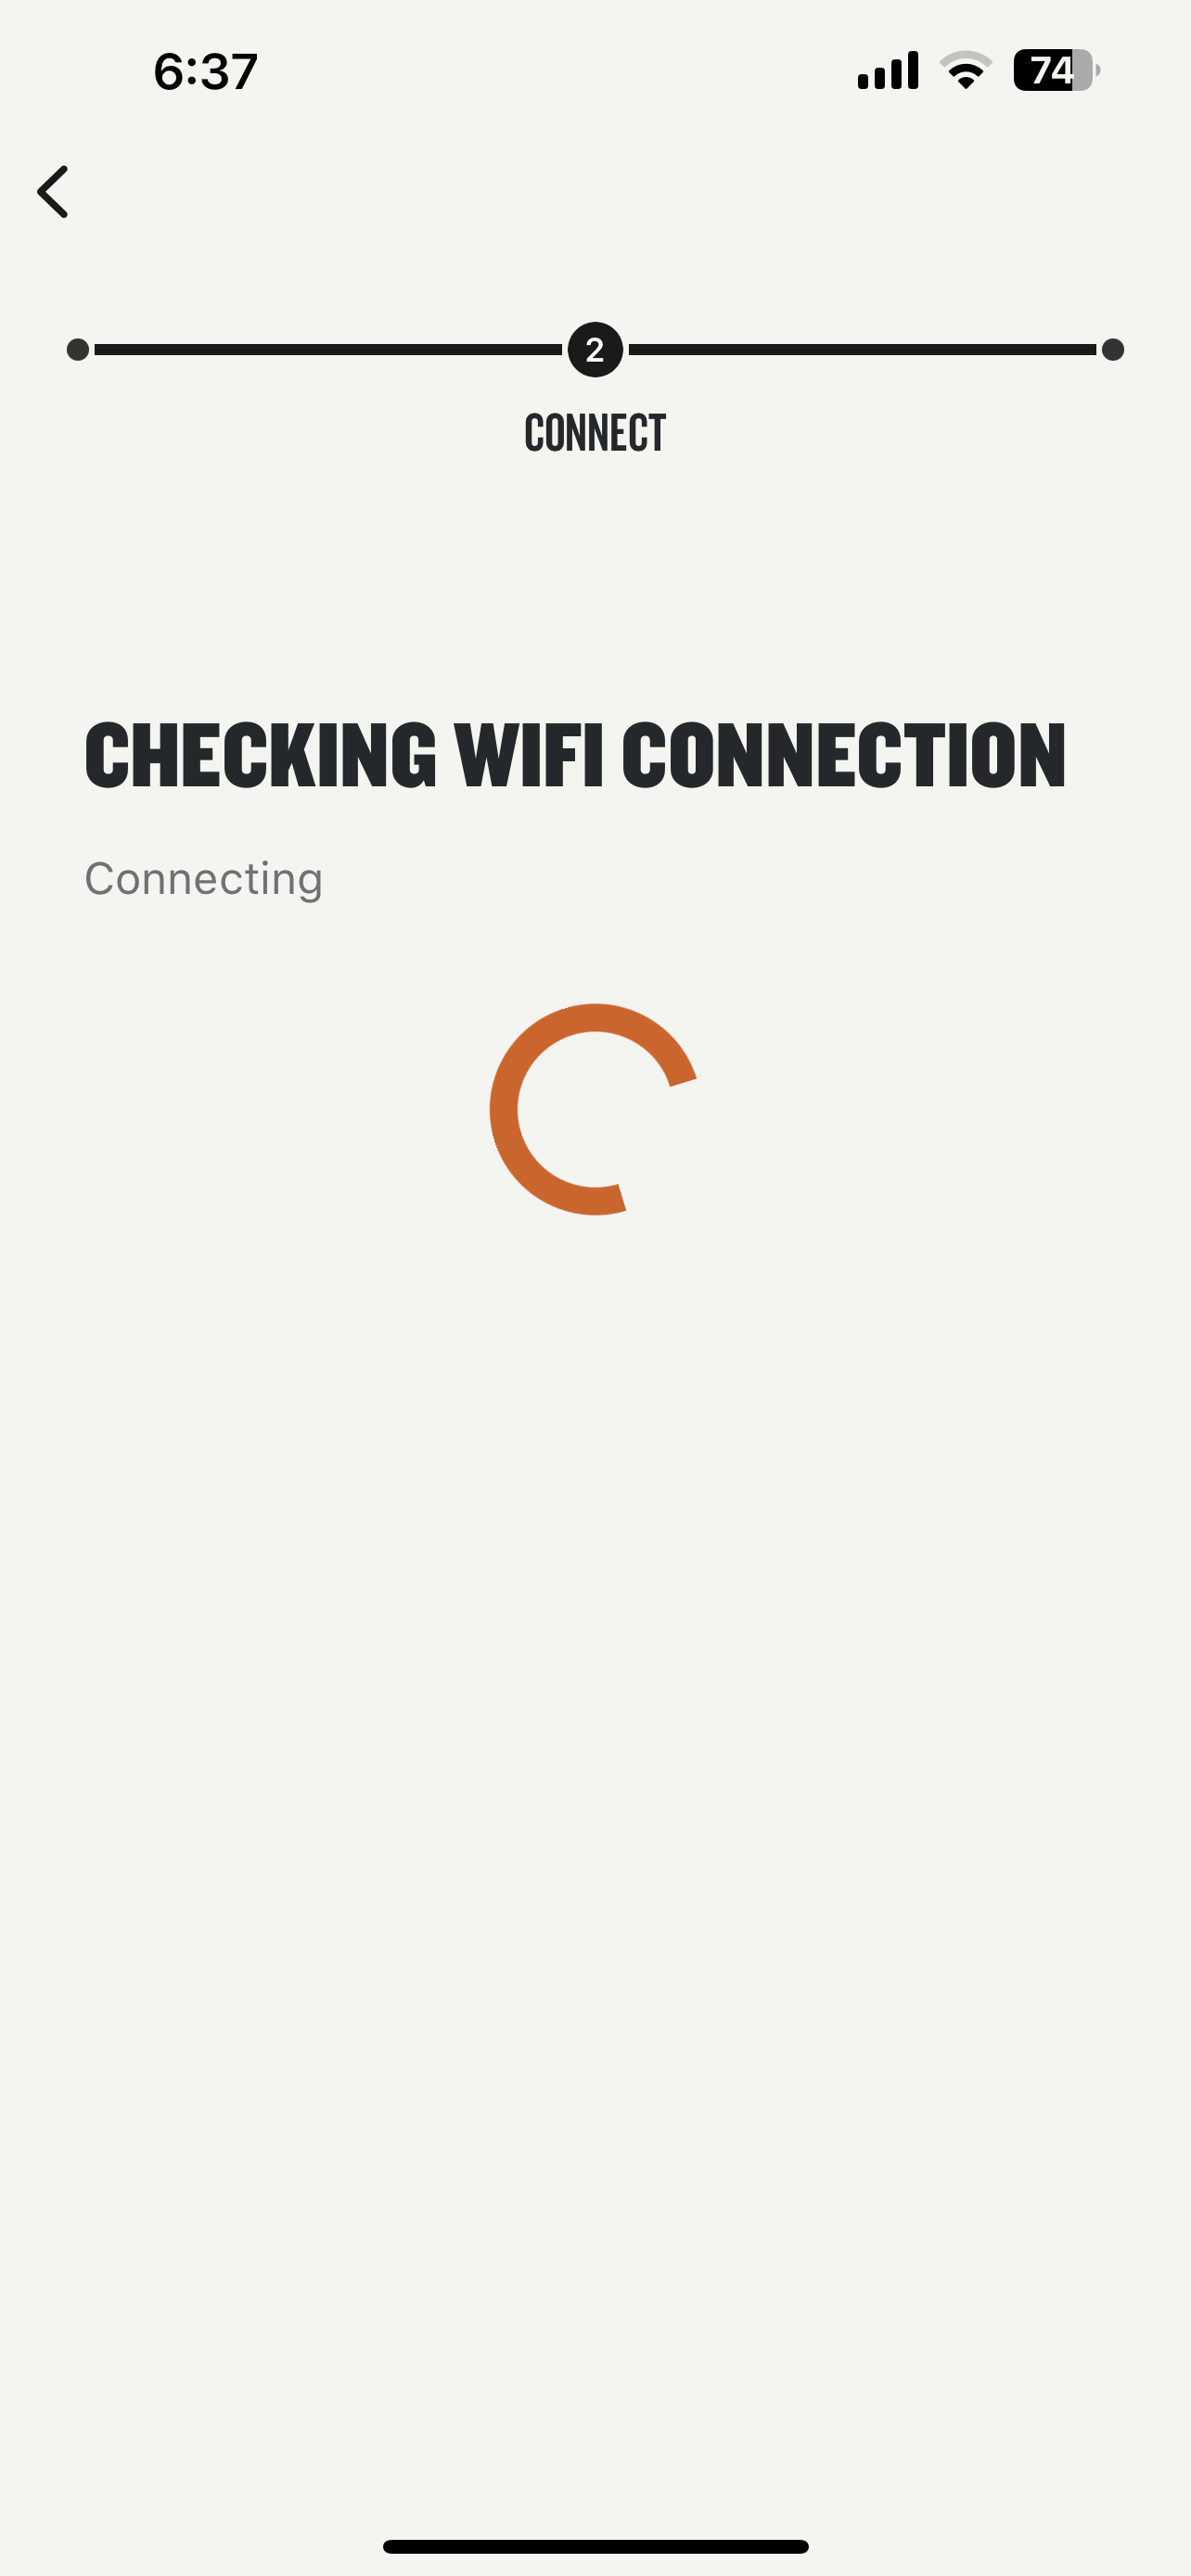 pair-app-yos-checking wifi connection_connecting.PNG